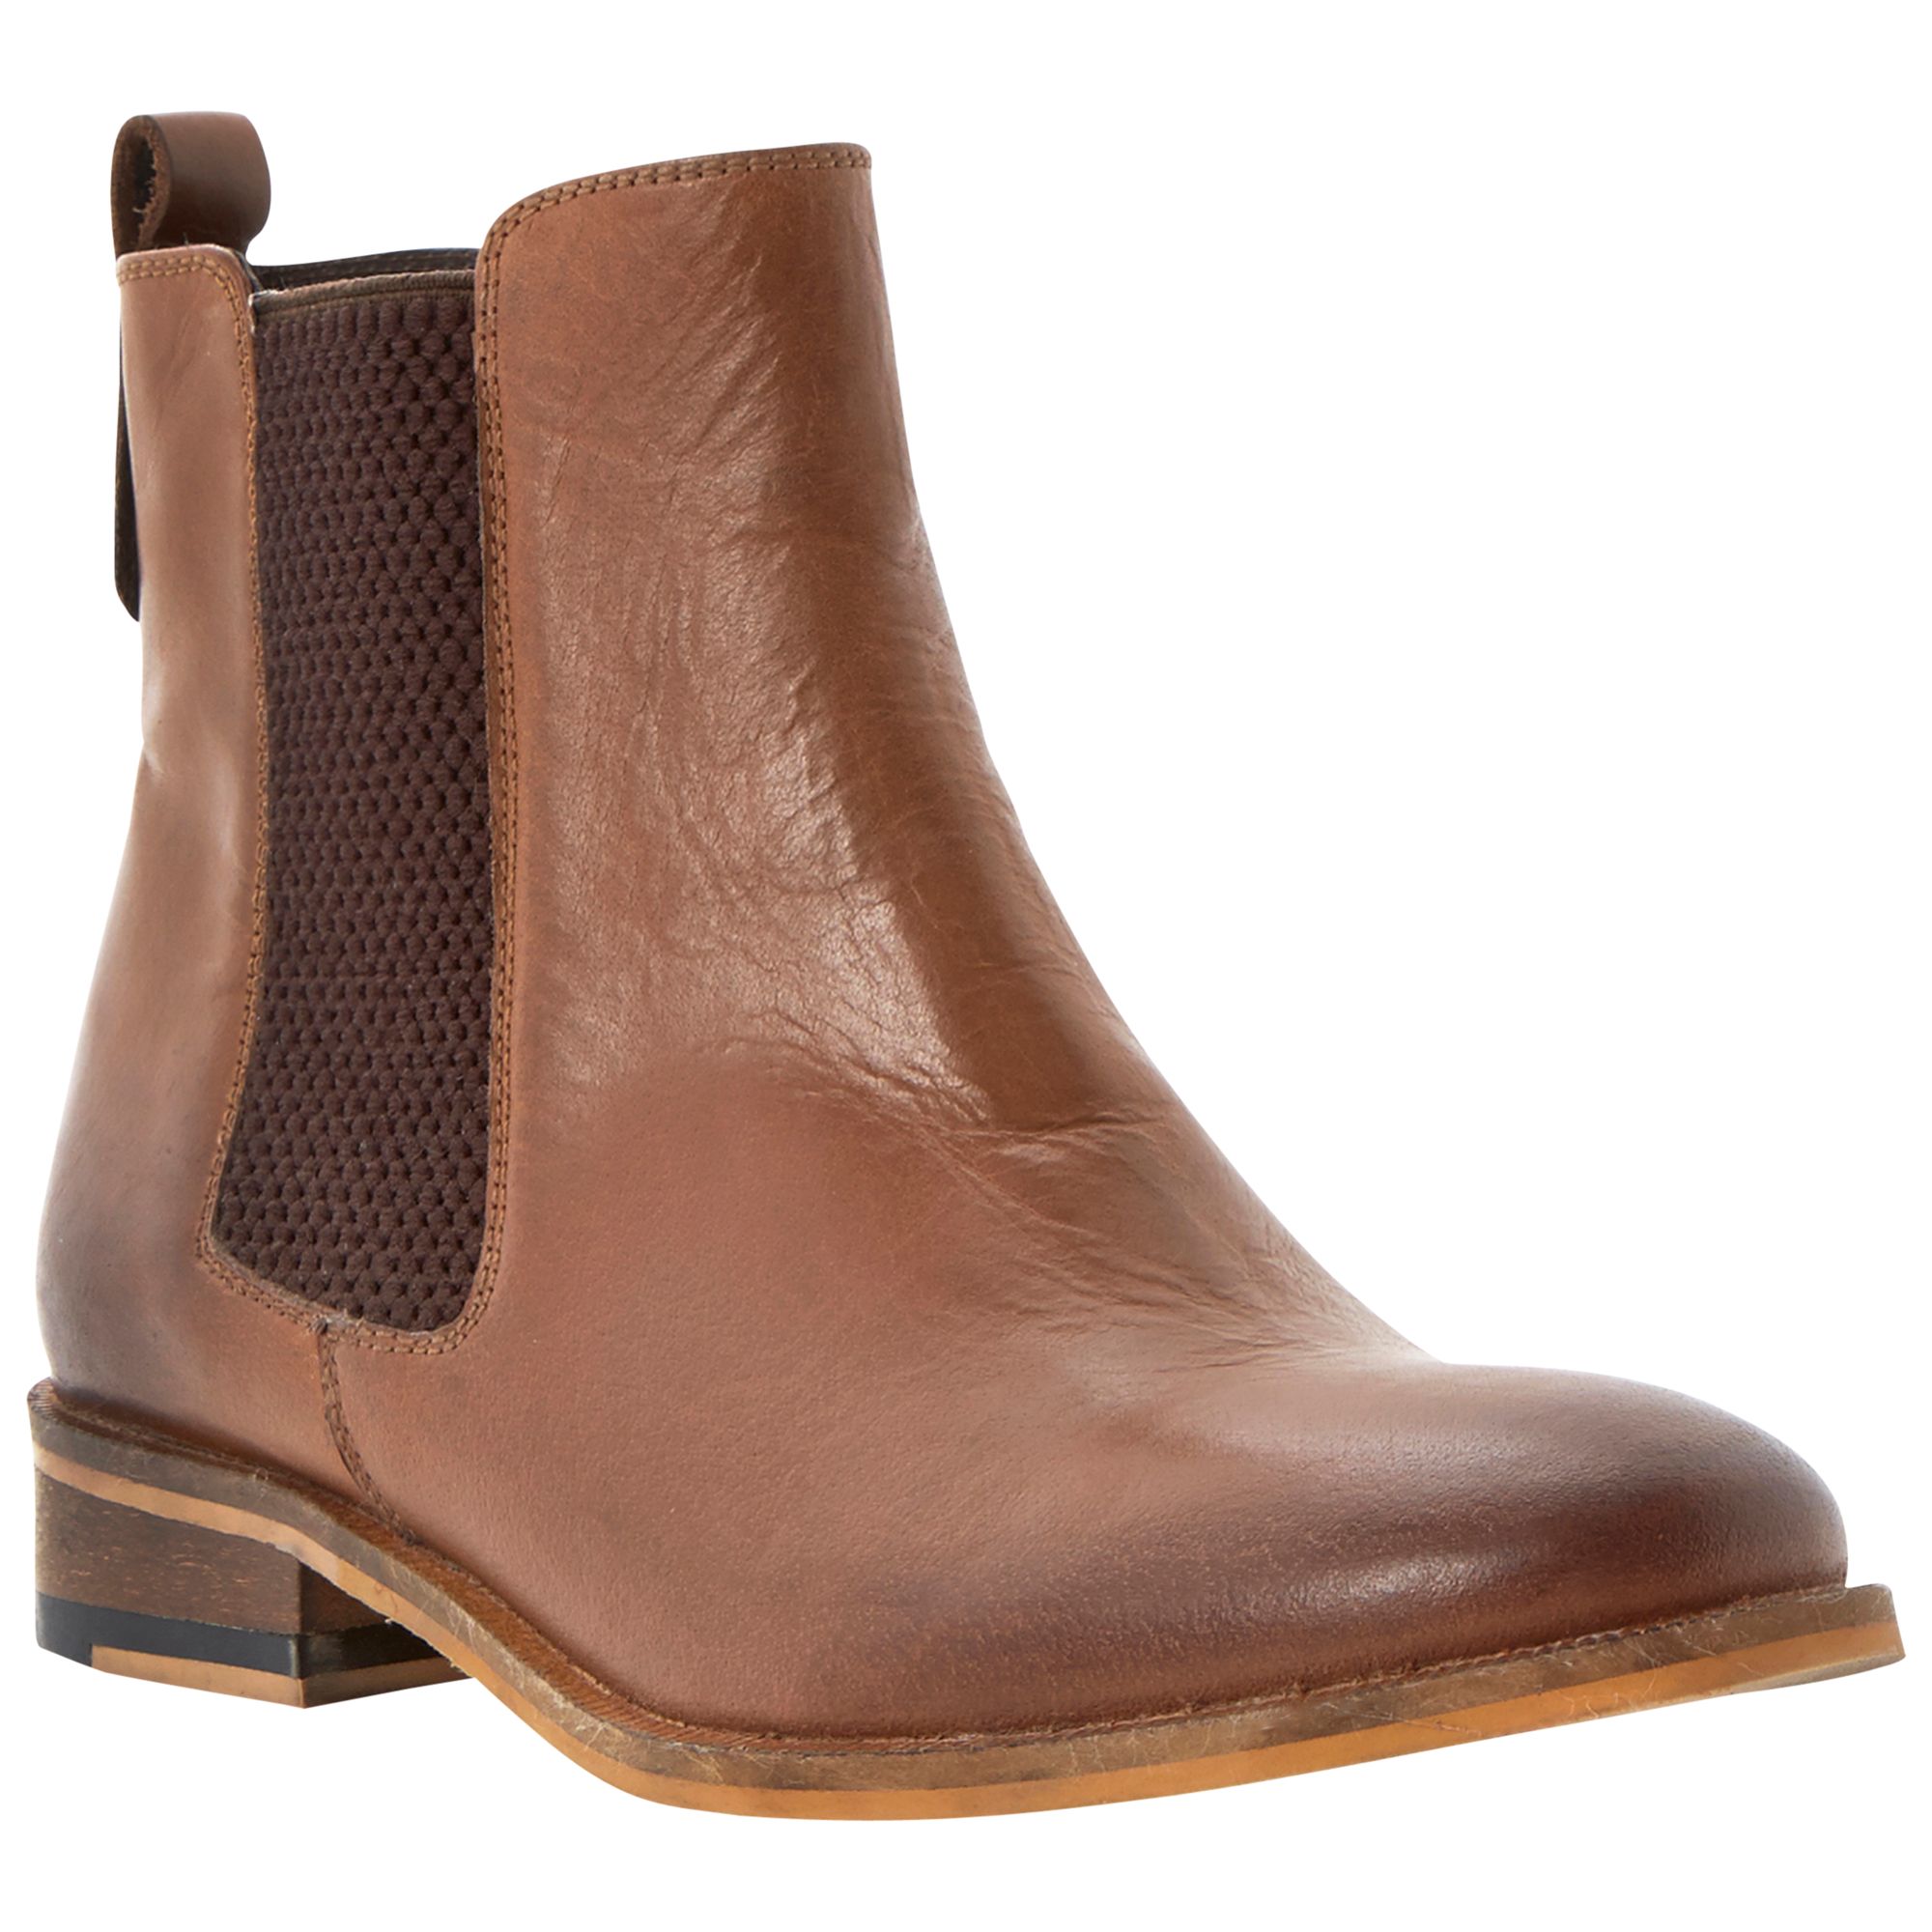 Bertie Palace Leather Chelsea Boots at John Lewis & Partners